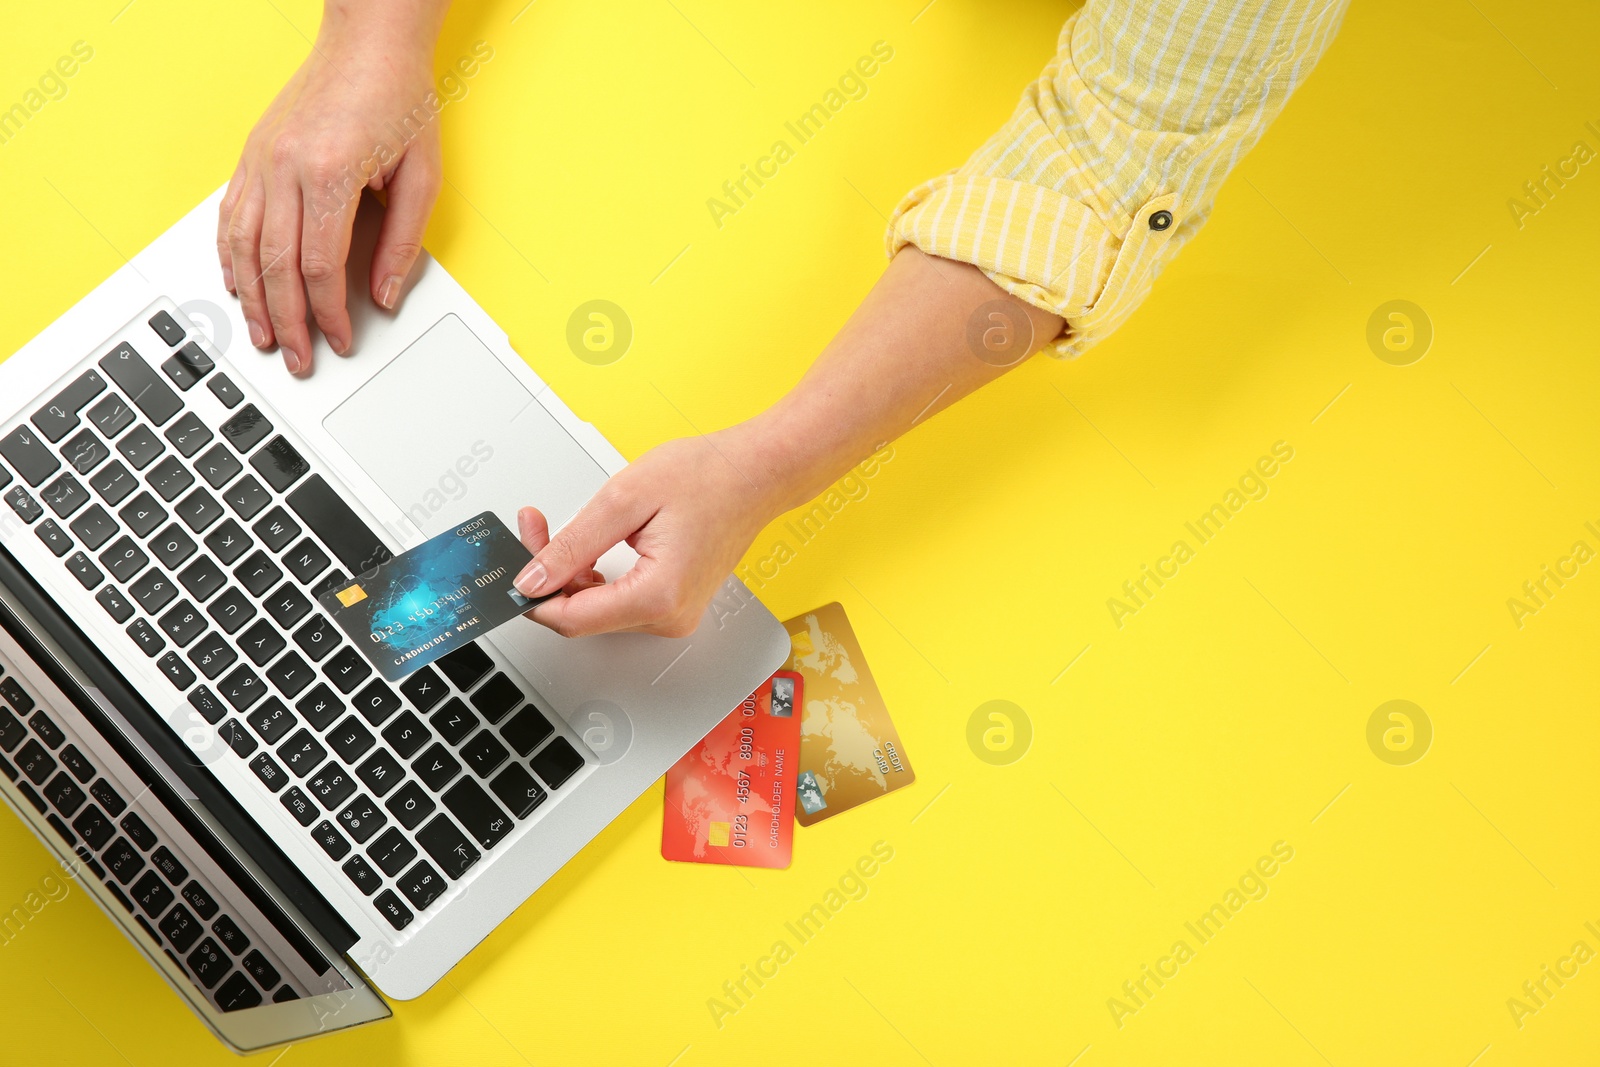 Photo of Online payment. Woman using credit card and laptop at yellow table, top view